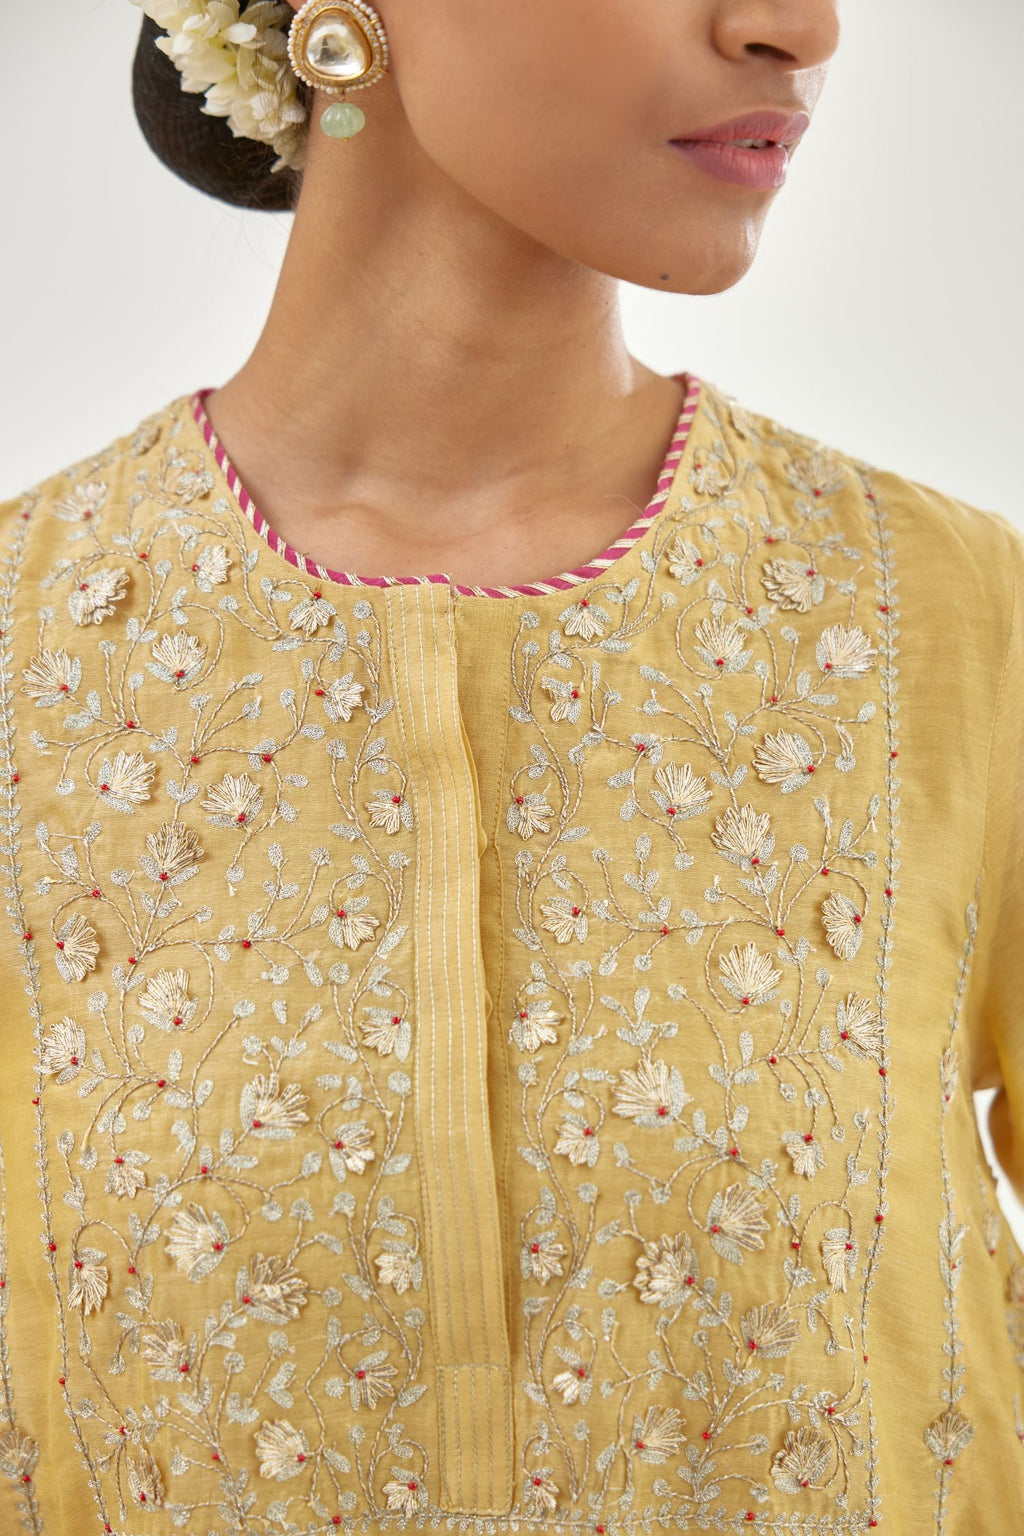 Yellow A-line long kurta with all-over zari, dori, sequins and gota embroidery.